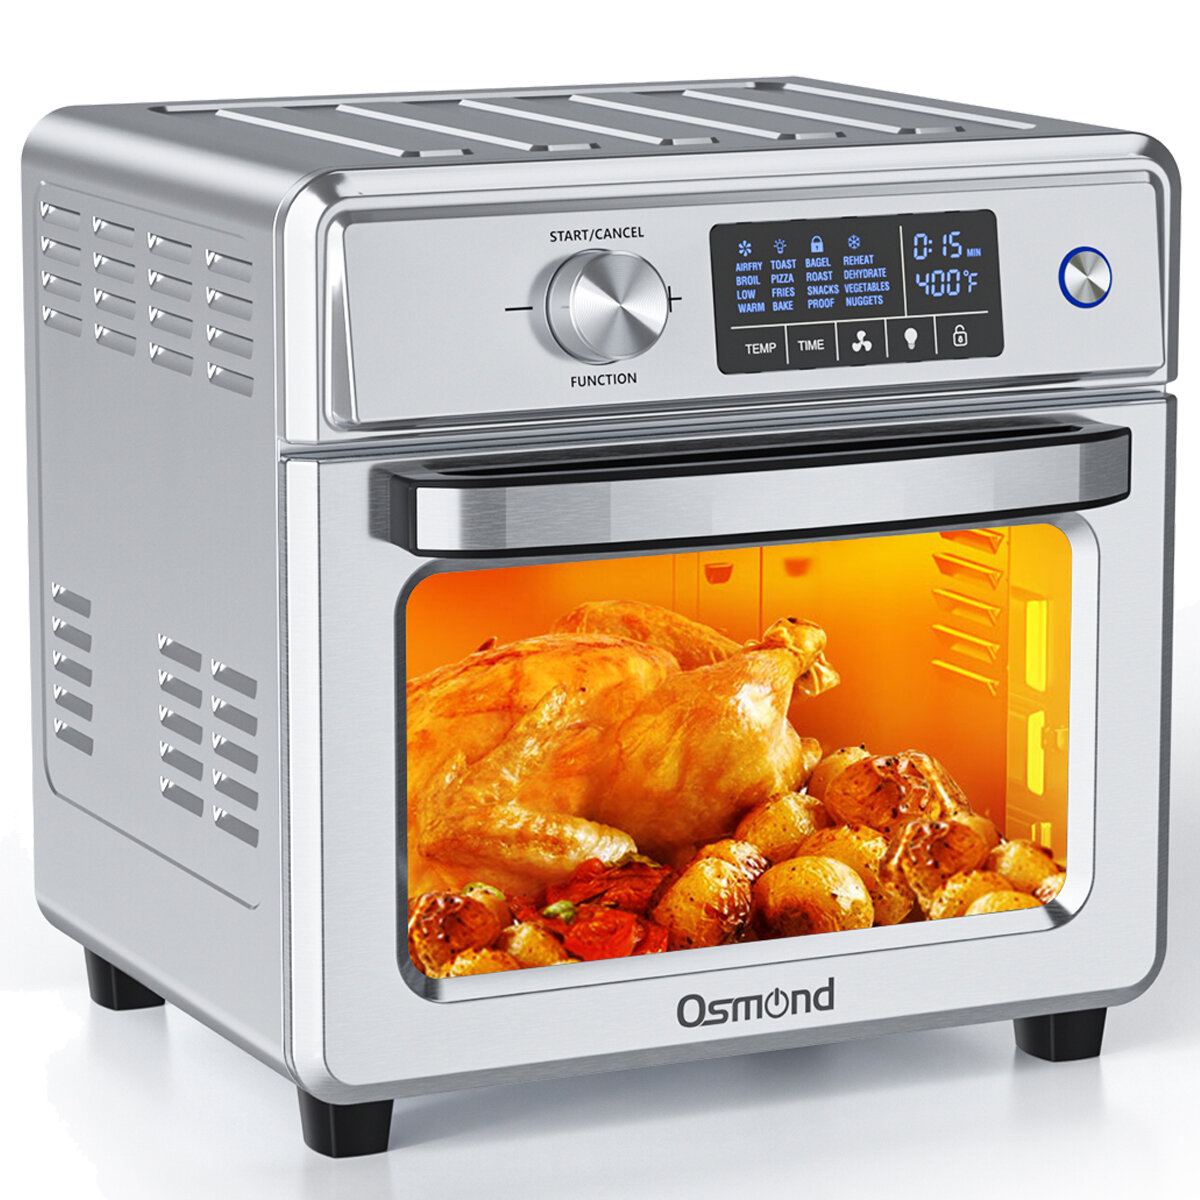 best price,osmond,kdf,819l,qt,in,air,fryer,toaster,oven,1700w,discount